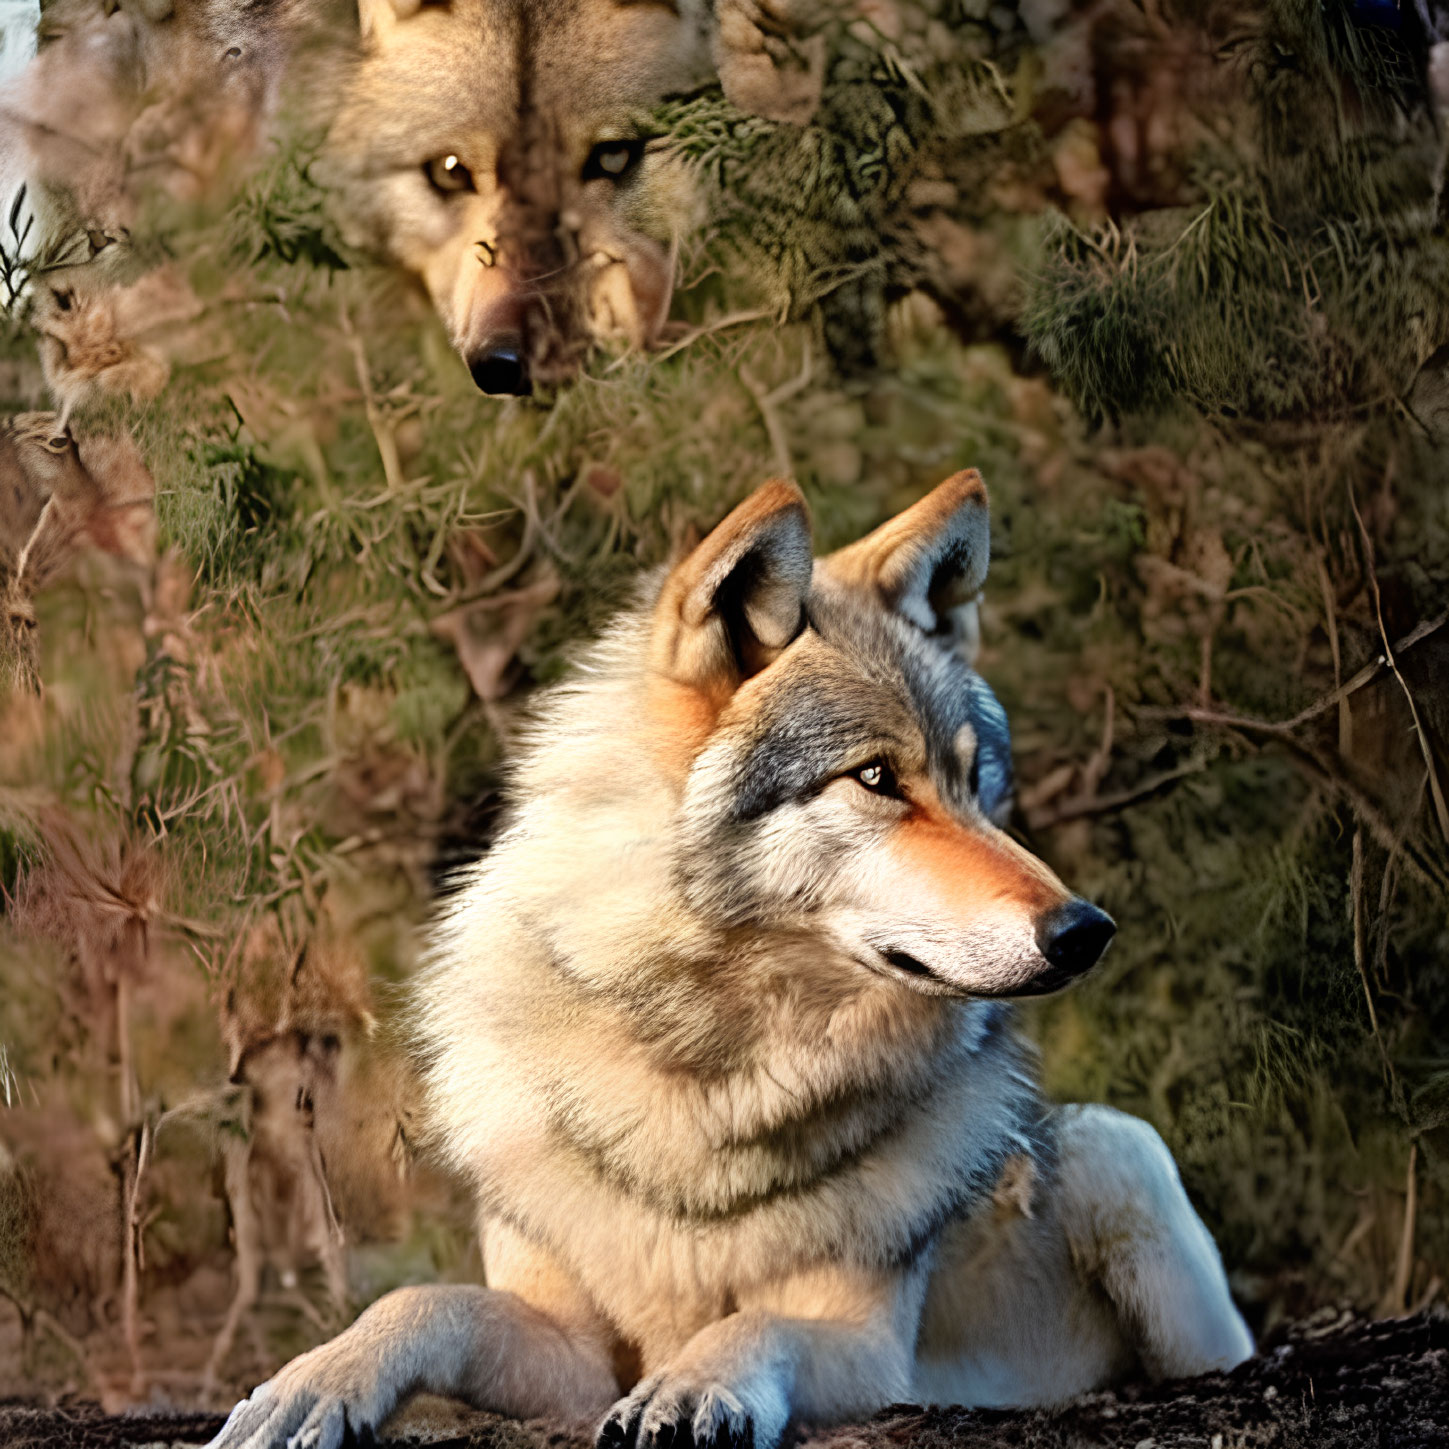 Two wolves in different poses depicted in the image.